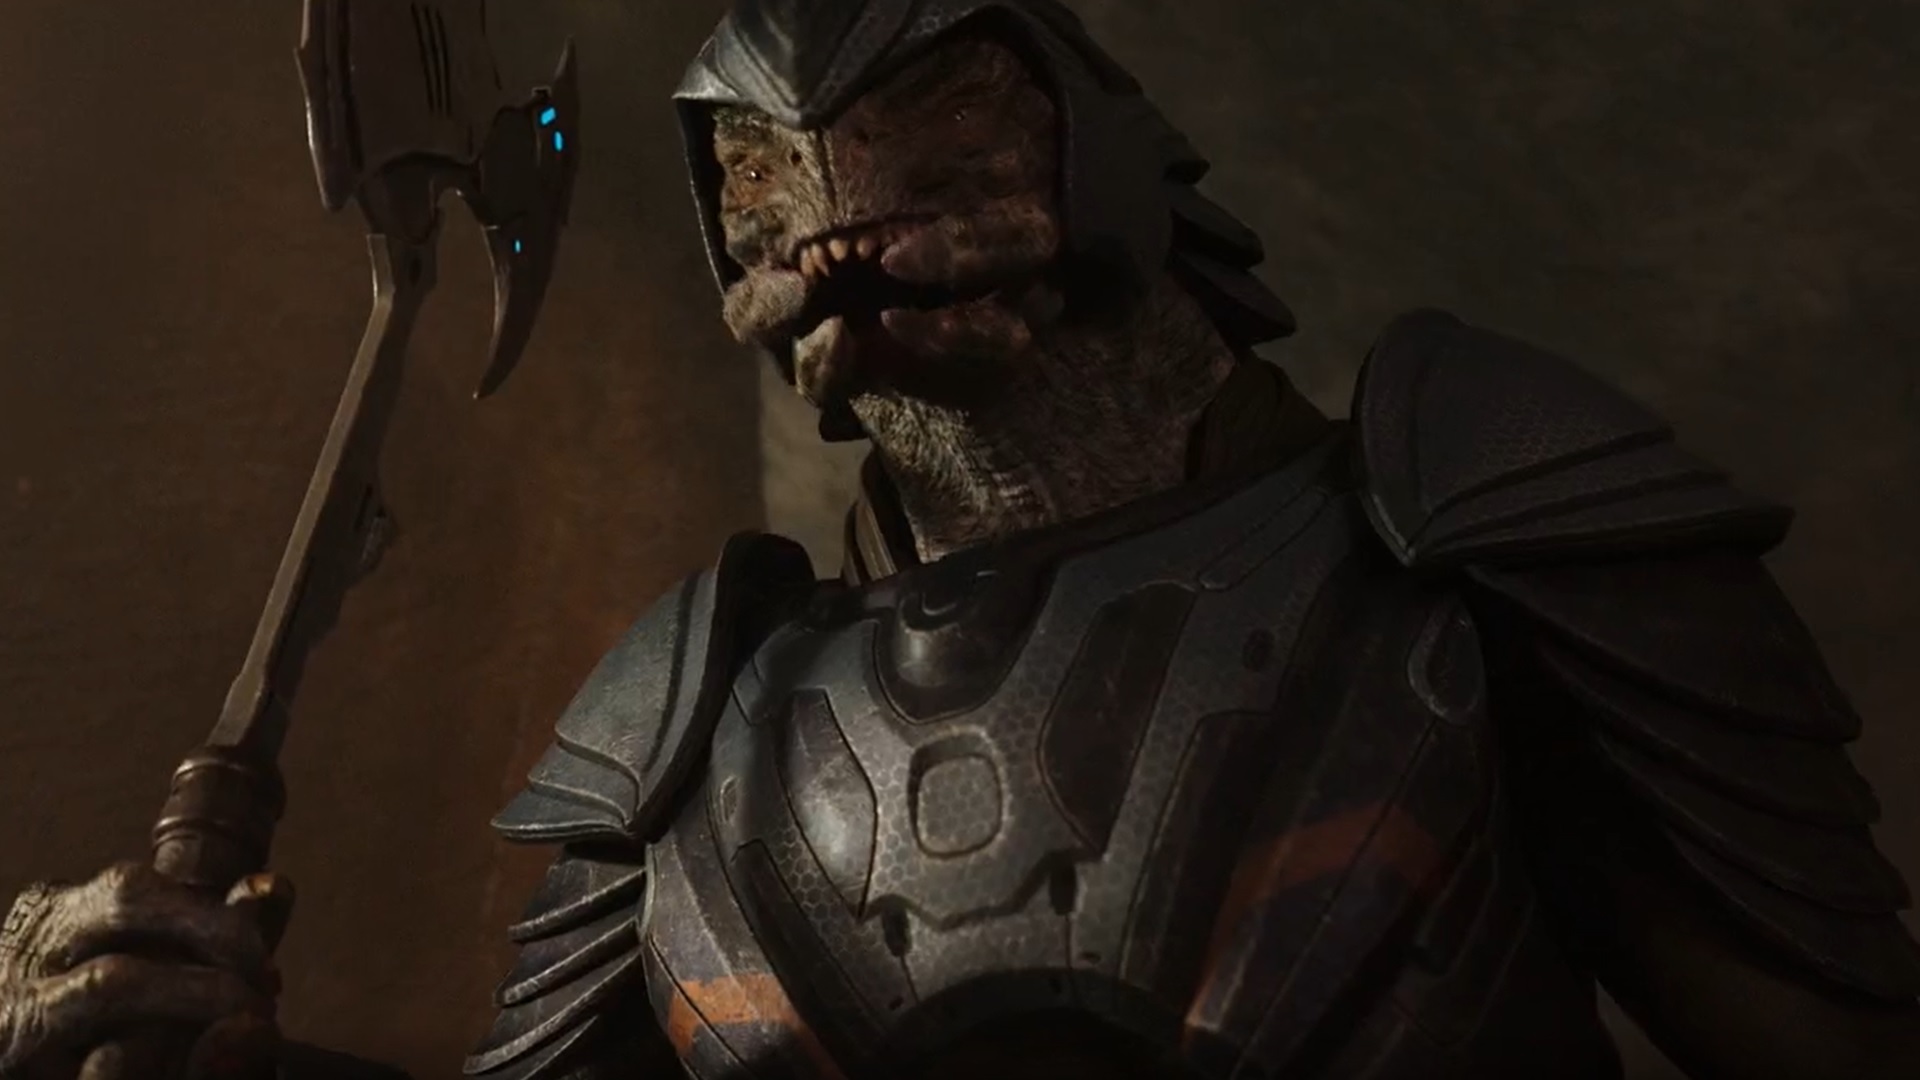 Shot of a Sangheili warrior from the Halo TV Series.